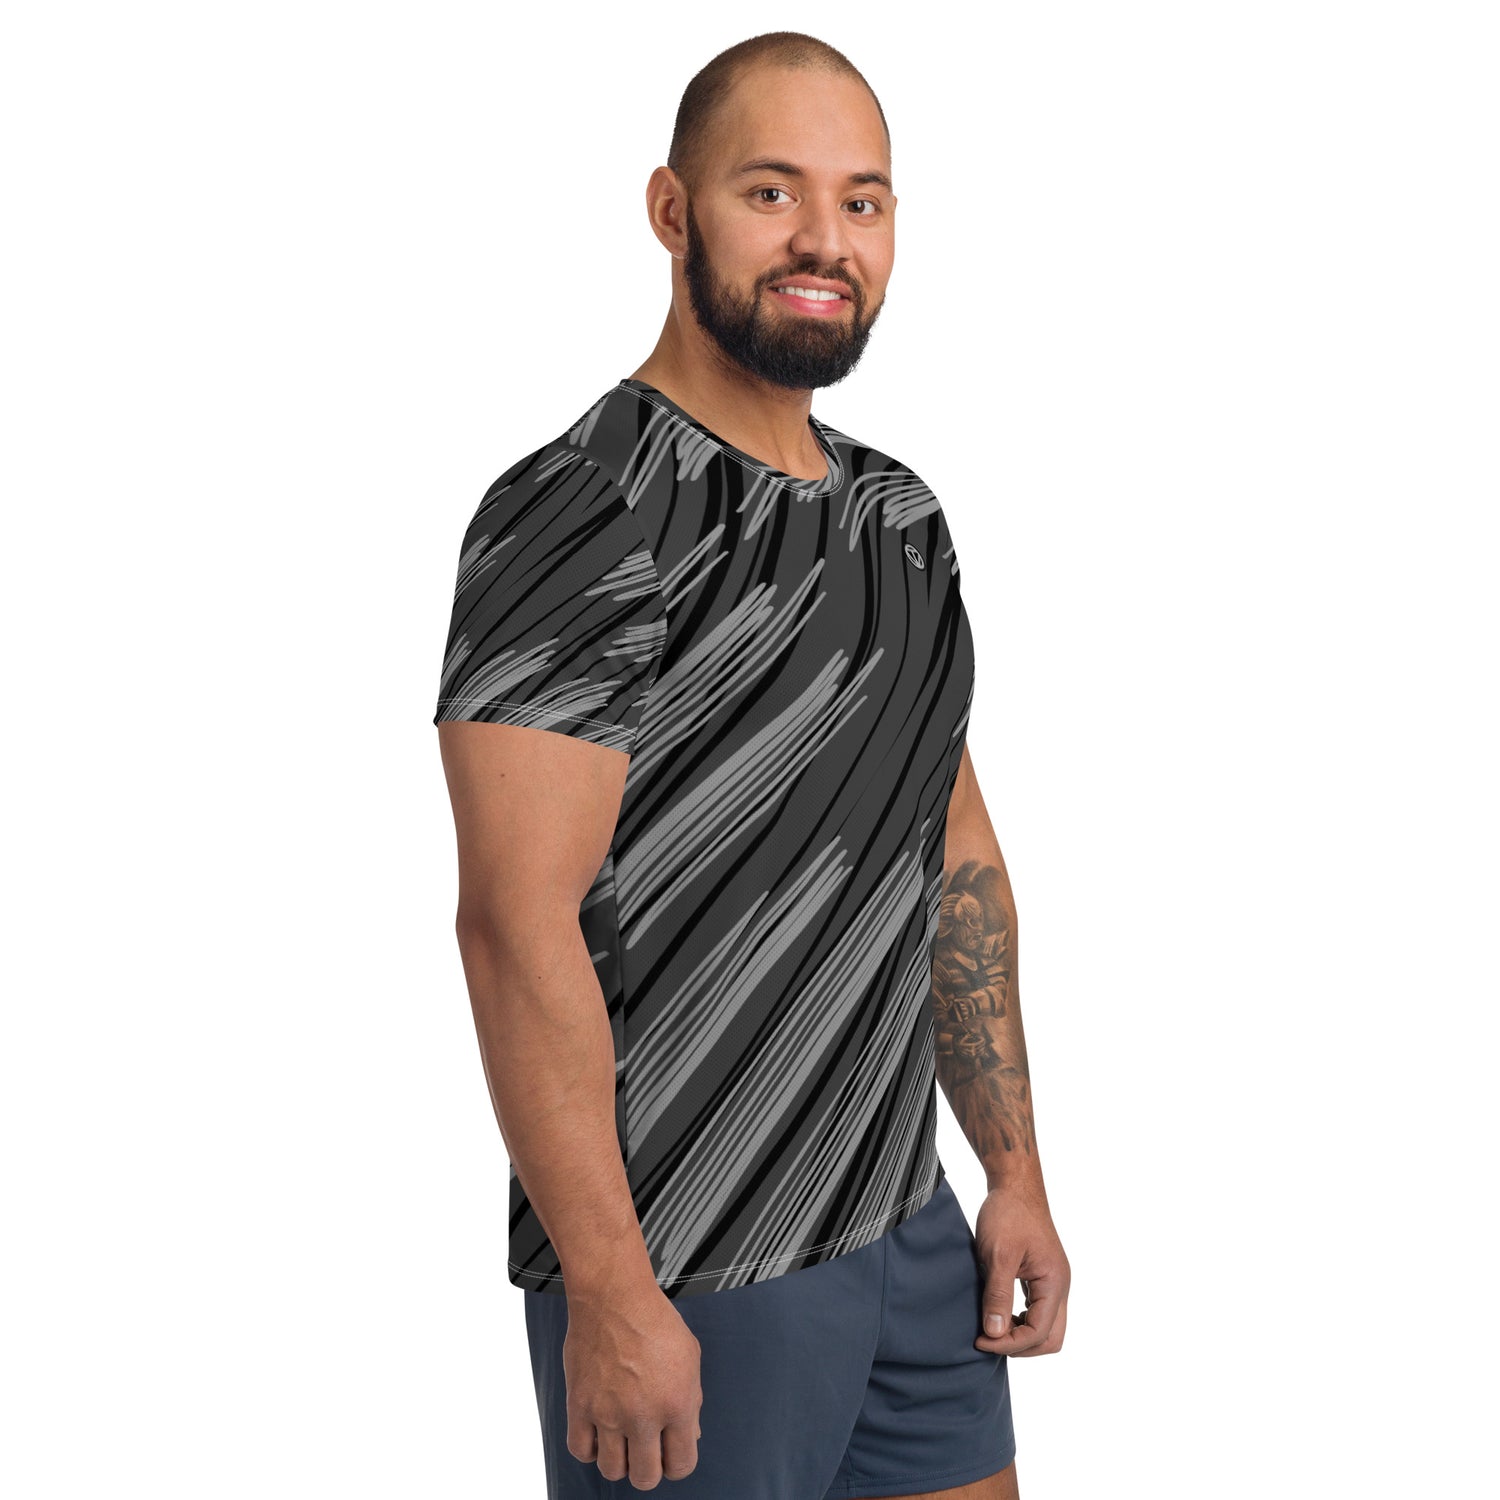 TIME OF VIBES TOV Herren Sport T-Shirt ABSTRACT - €45,00